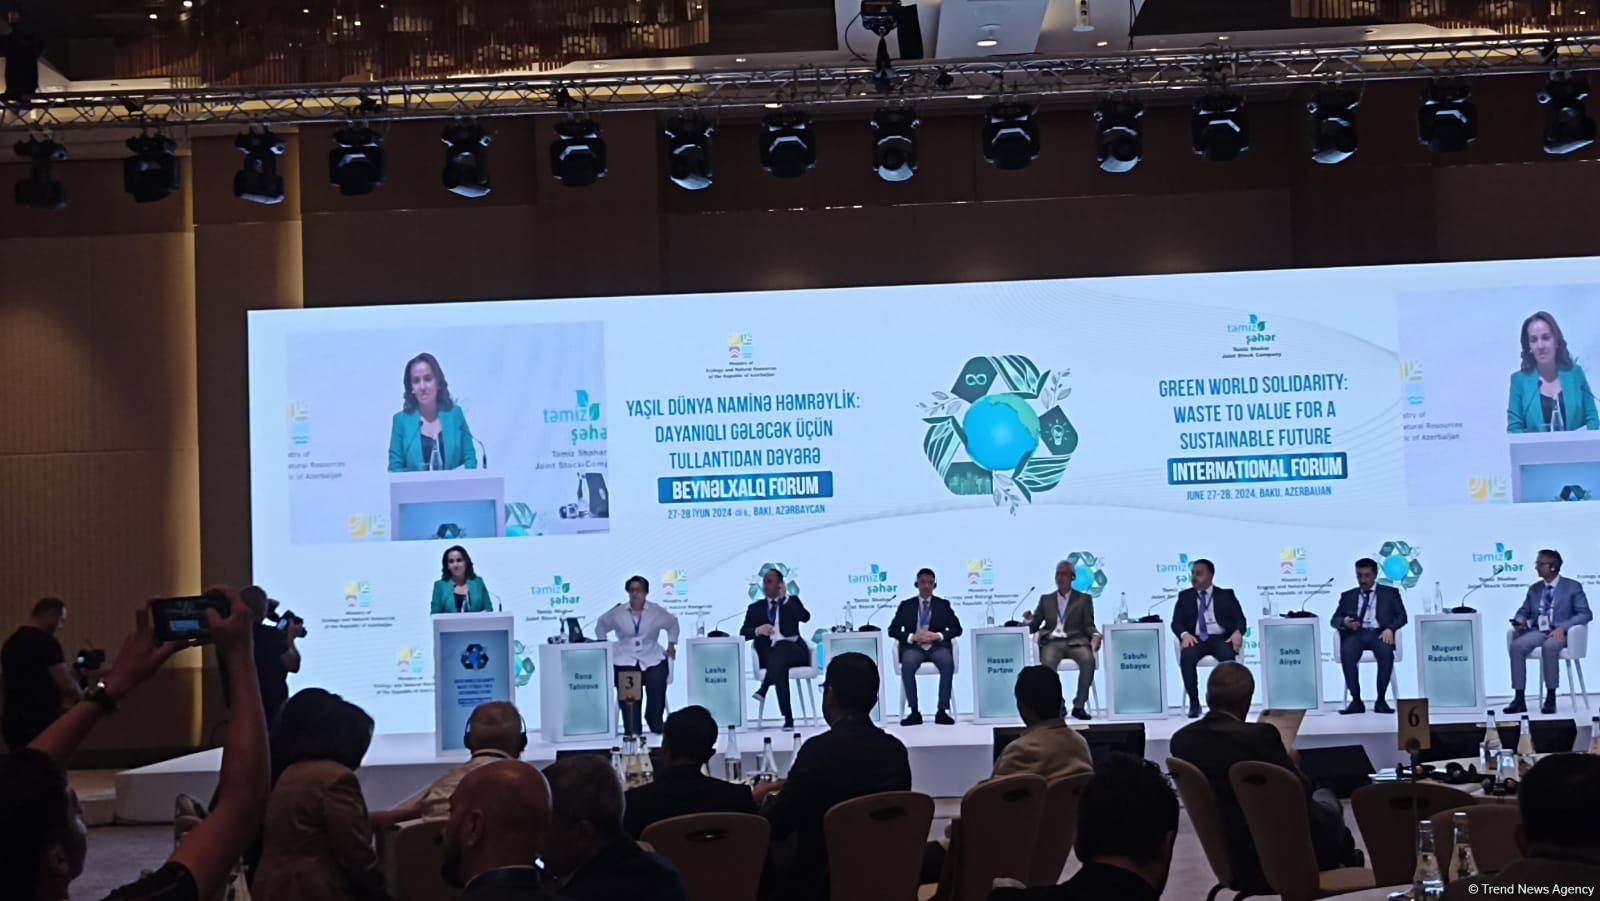 Azerbaijan has great opportunities for waste recycling activities - IFC